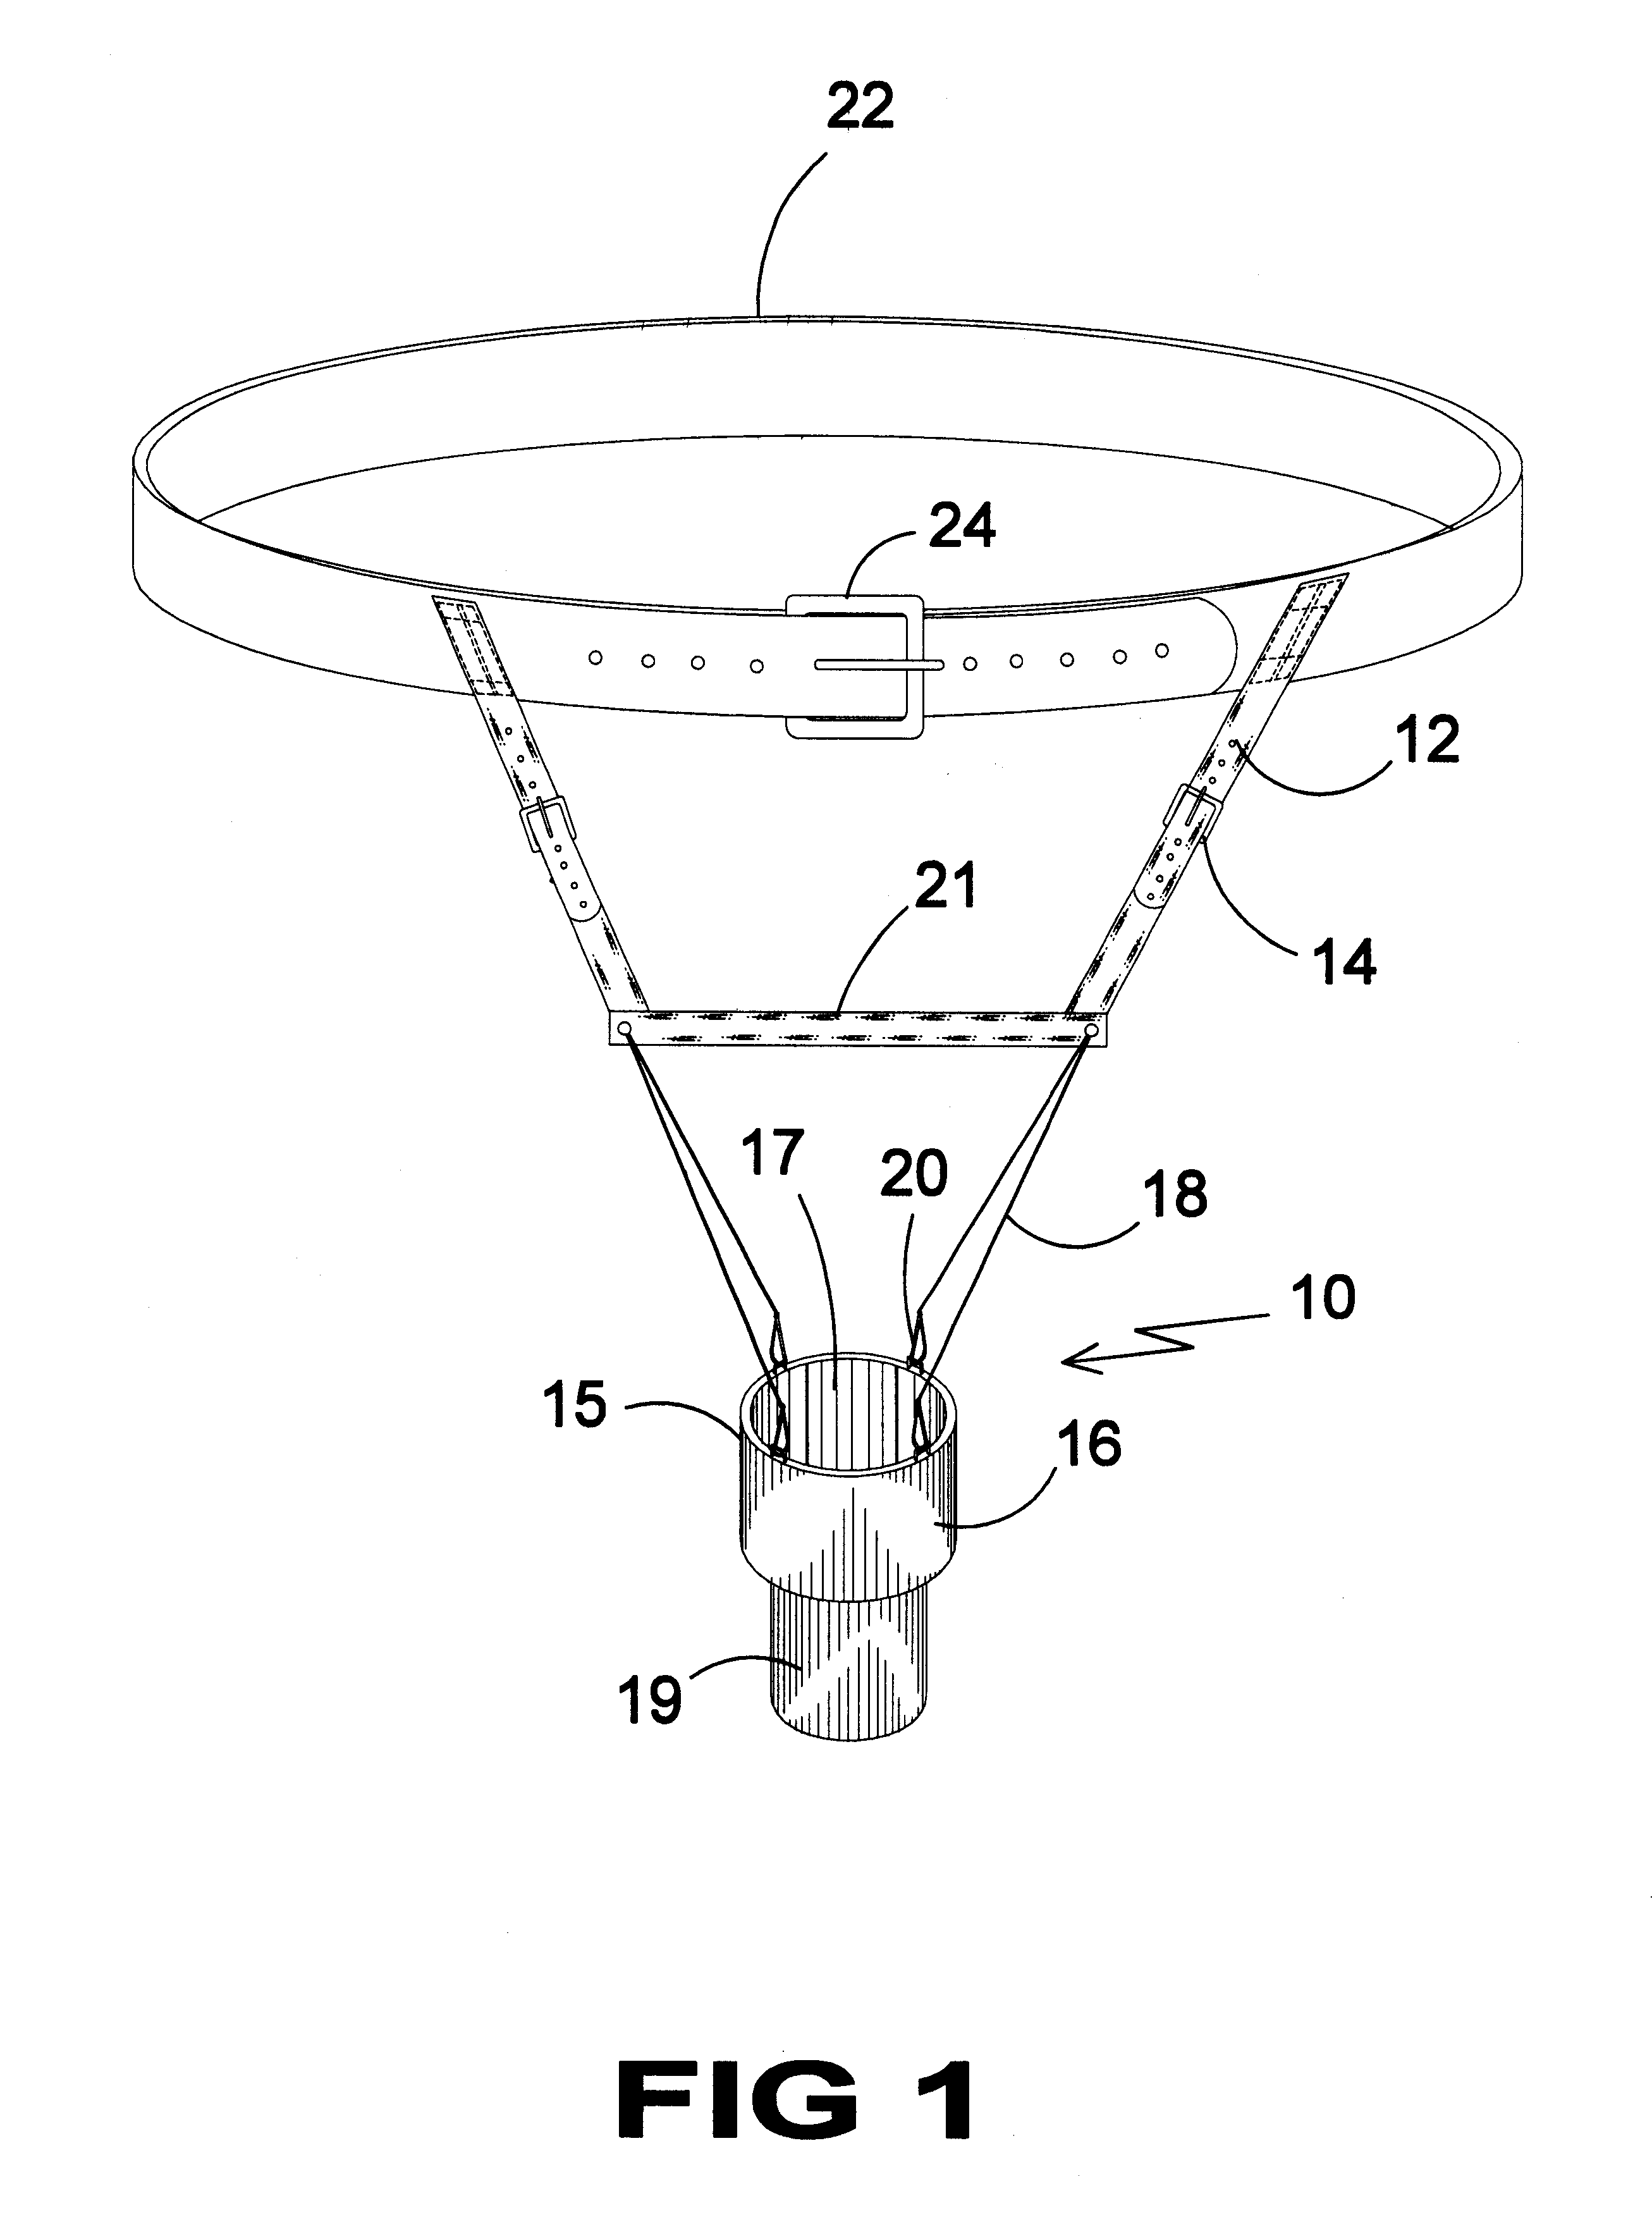 Incontinence device